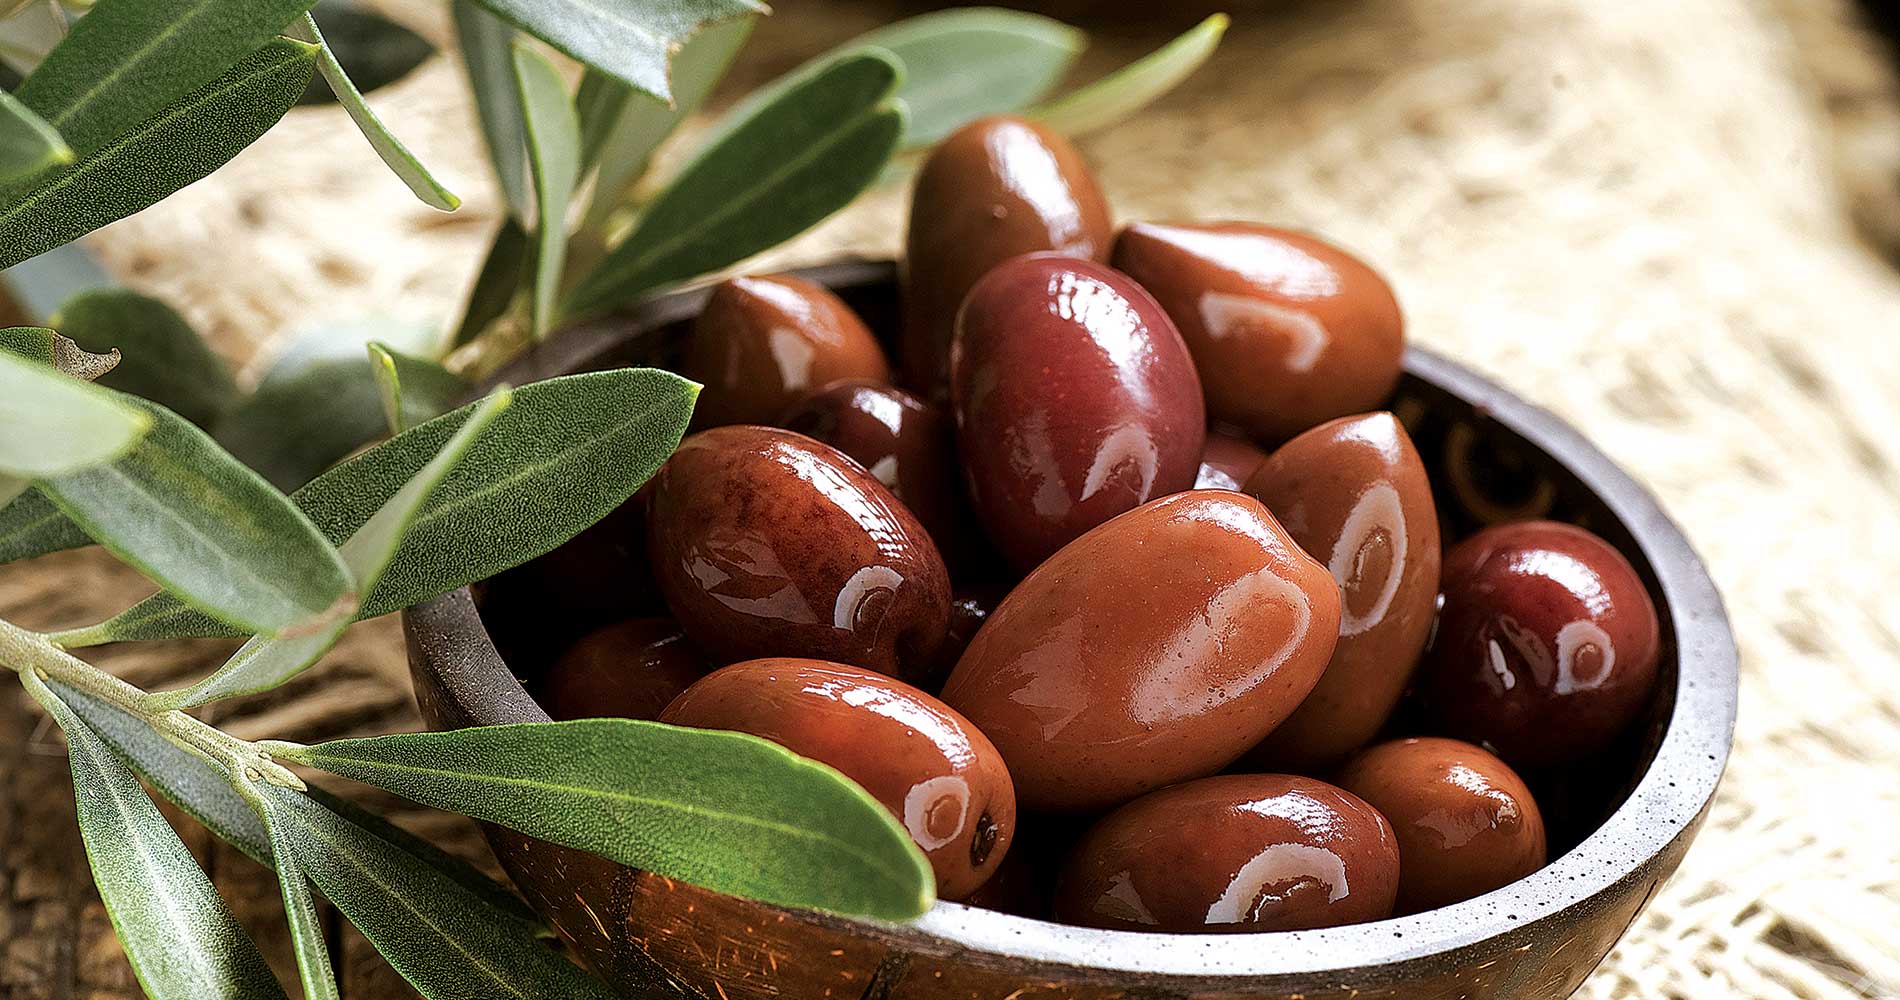 Kalamata olives: The healthiest in the world! - Greek Food News